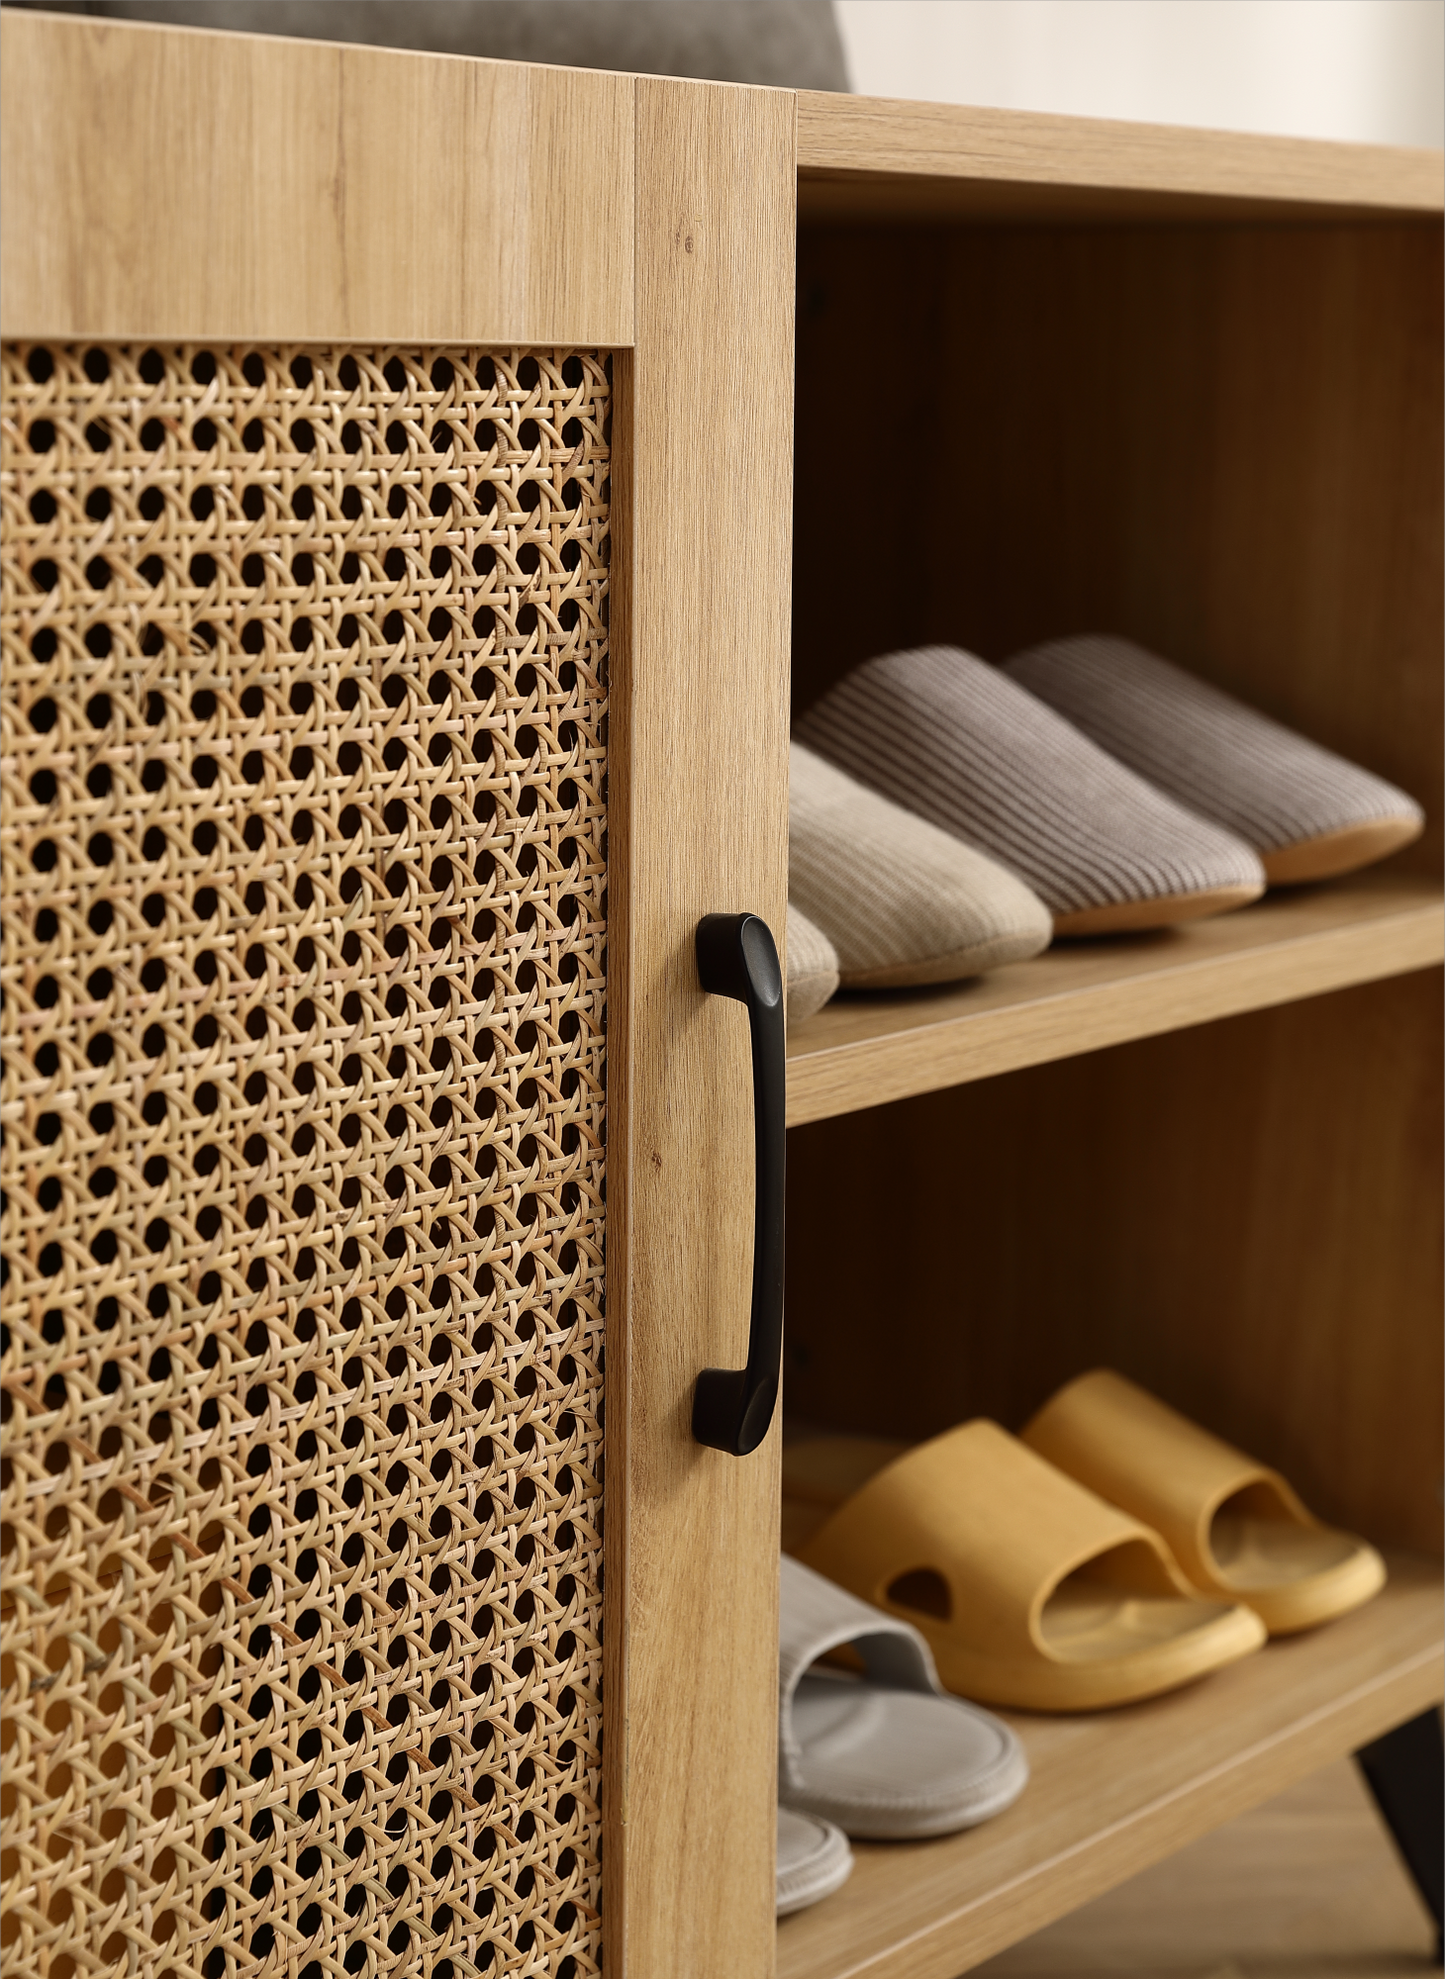 Modern Shoe-Storage Cabinet with Natural Rattan Mesh Door and Solid Wooden Handle 39.37inch